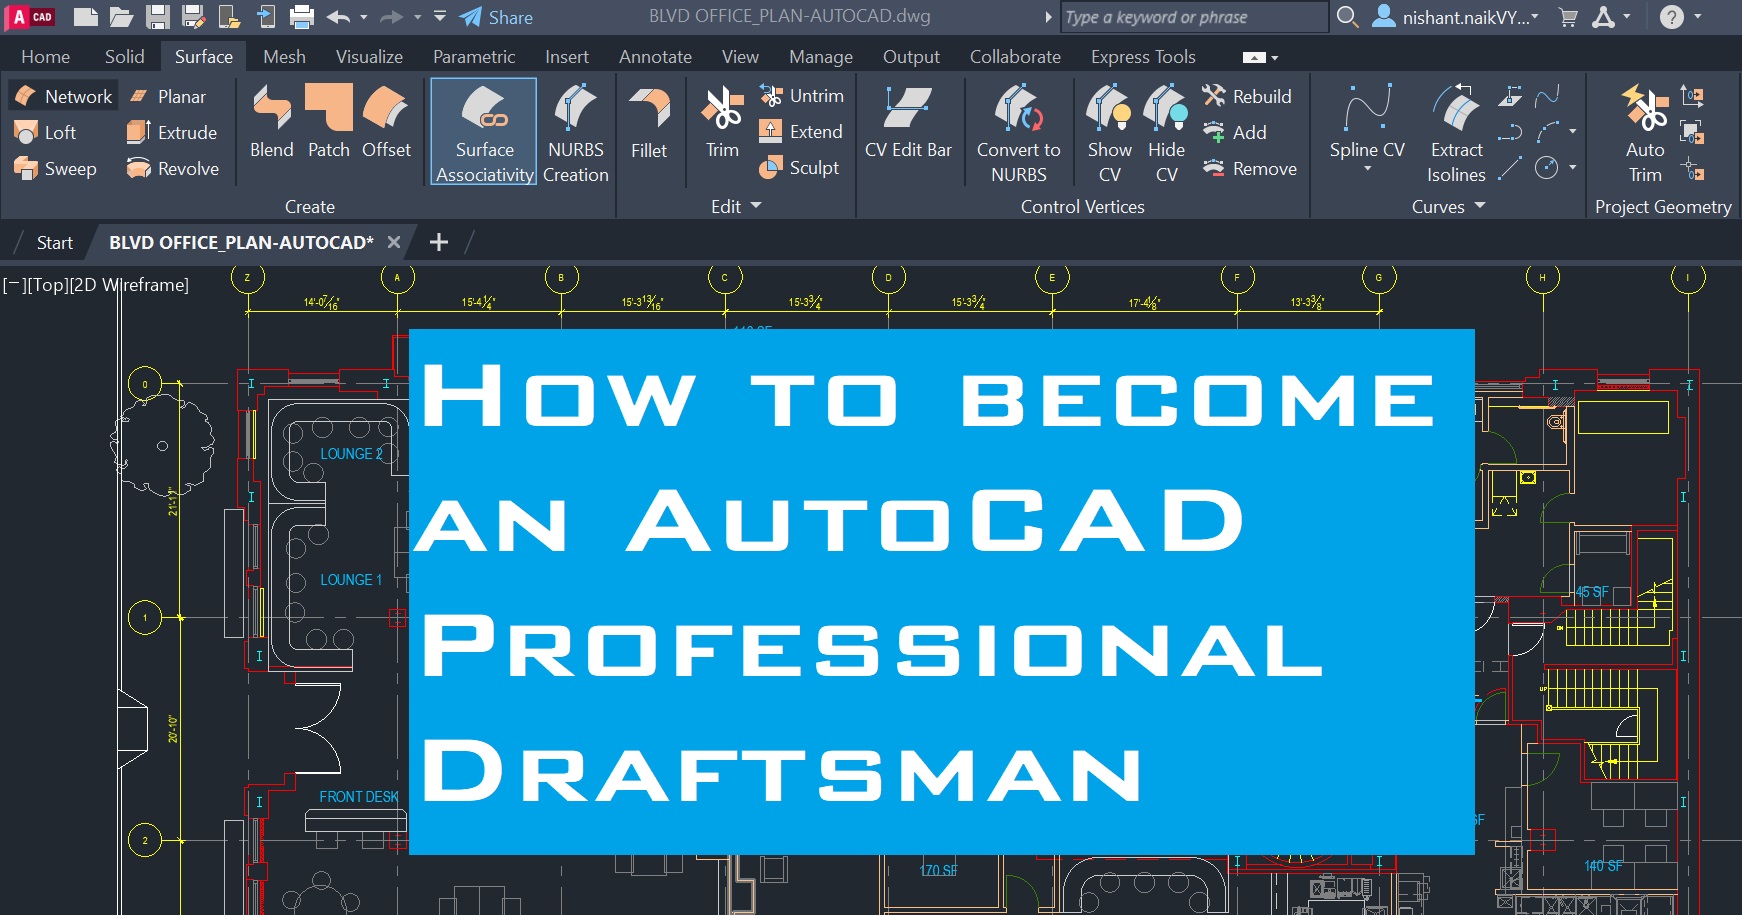 How to become an AutoCAD Professional Draftsman